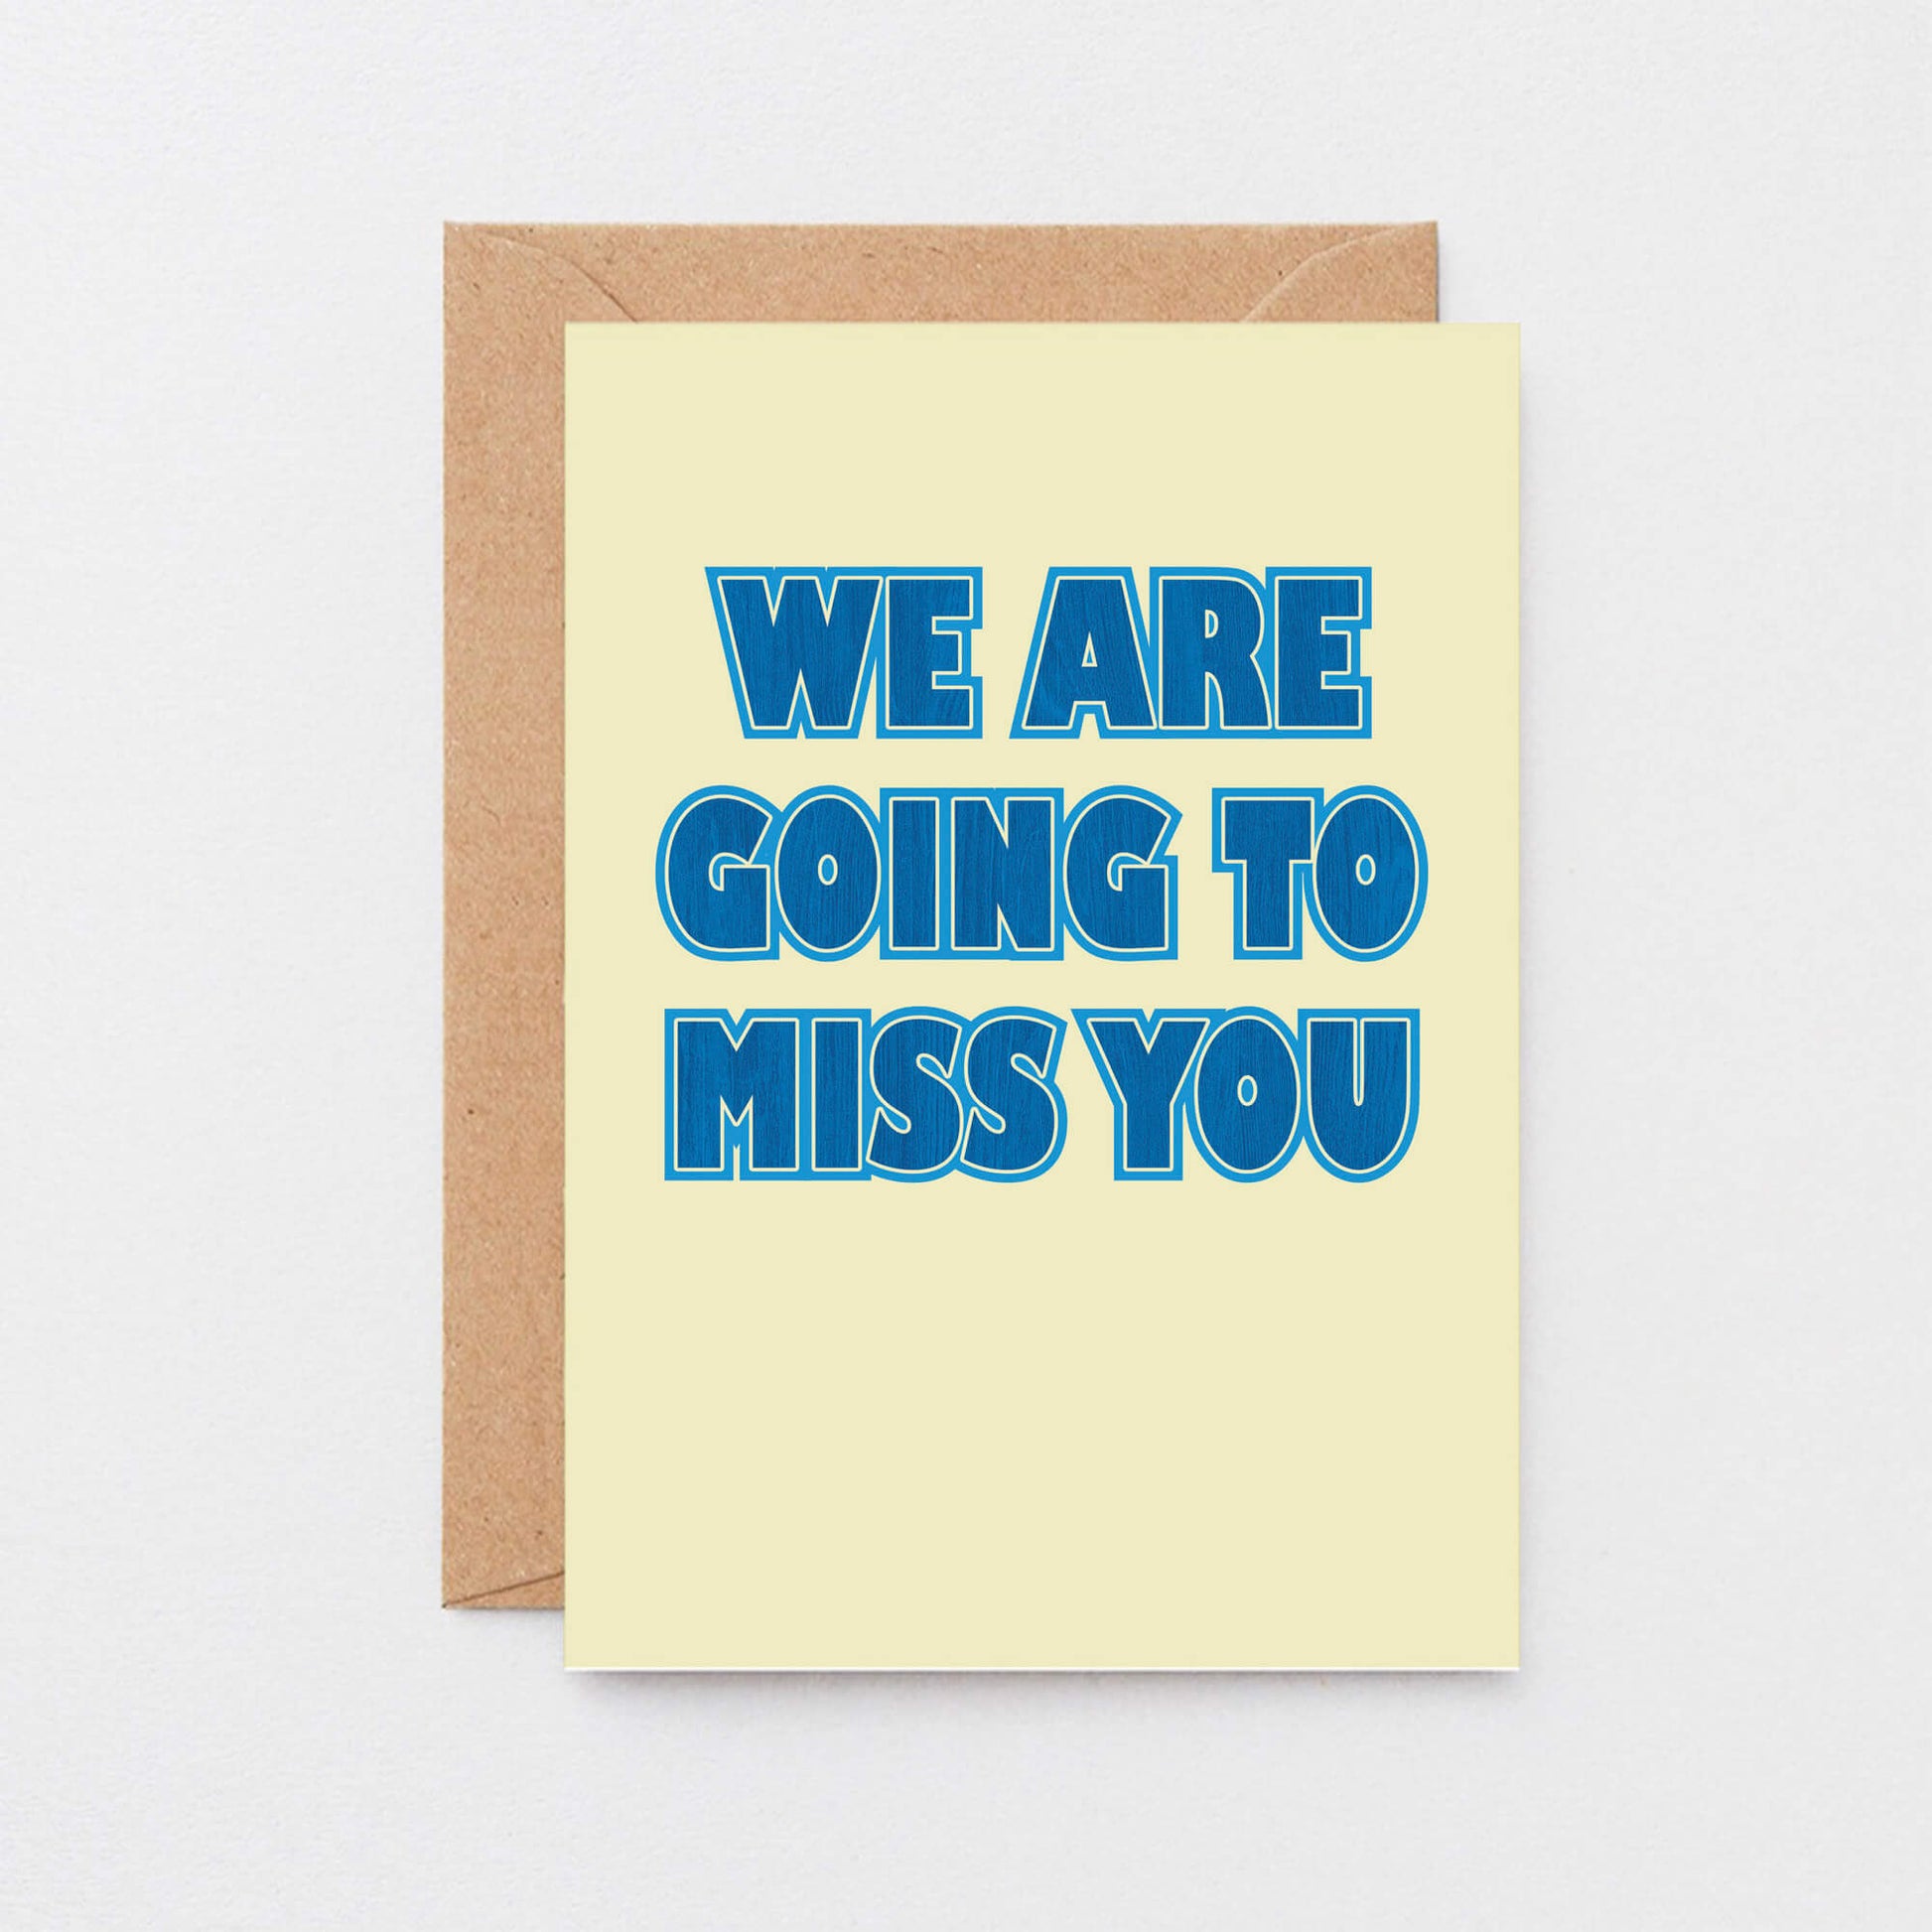 We Are Going To Miss You Card by SixElevenCreations. Product Code SE1505A6